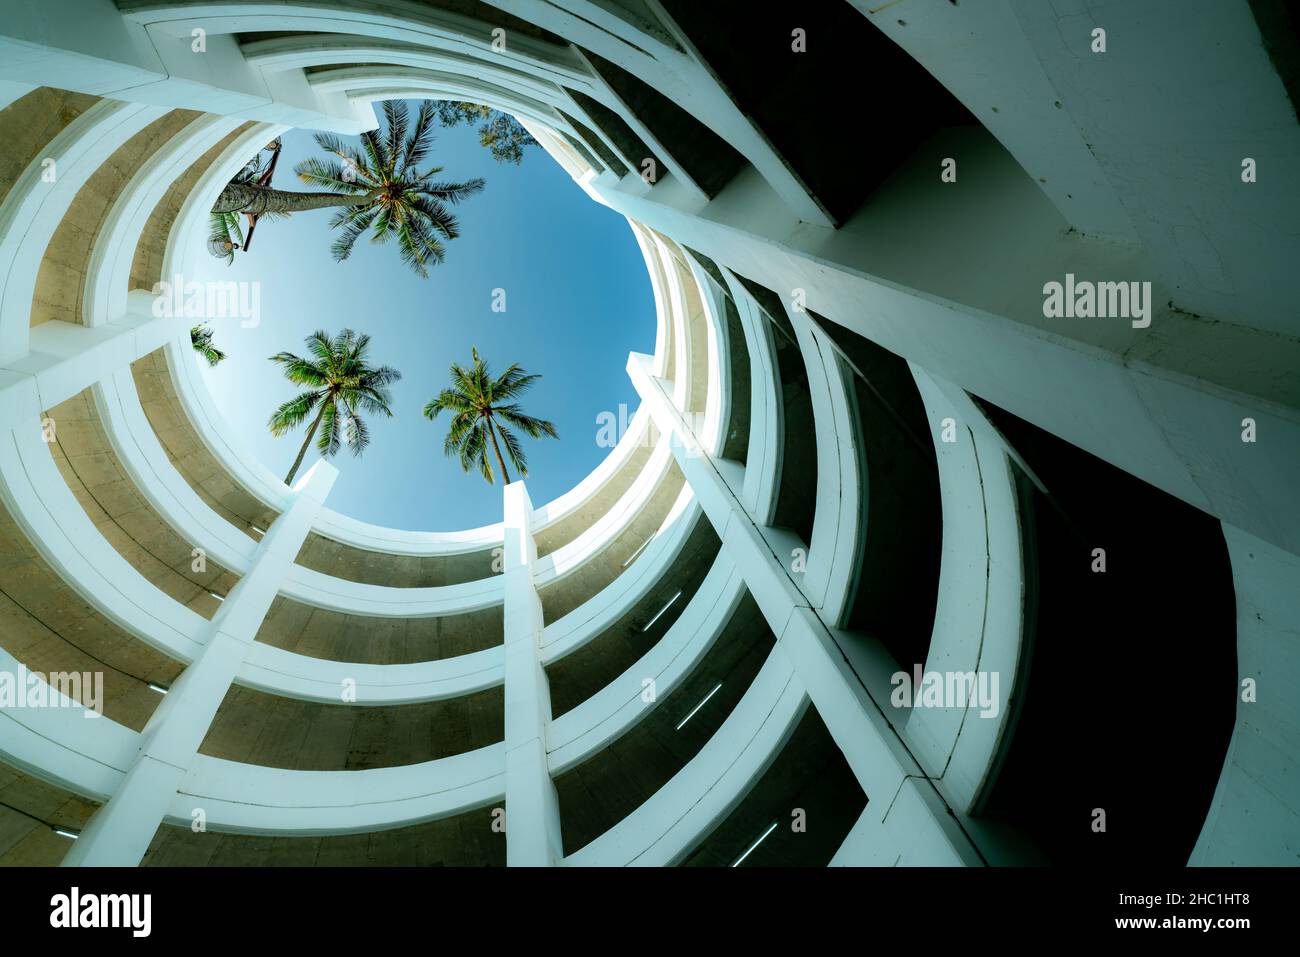 Bottom view multi-story car park building with coconut tree above building in summer. Multi-level parking garage. Indoor car parking lot. Architecture Stock Photo